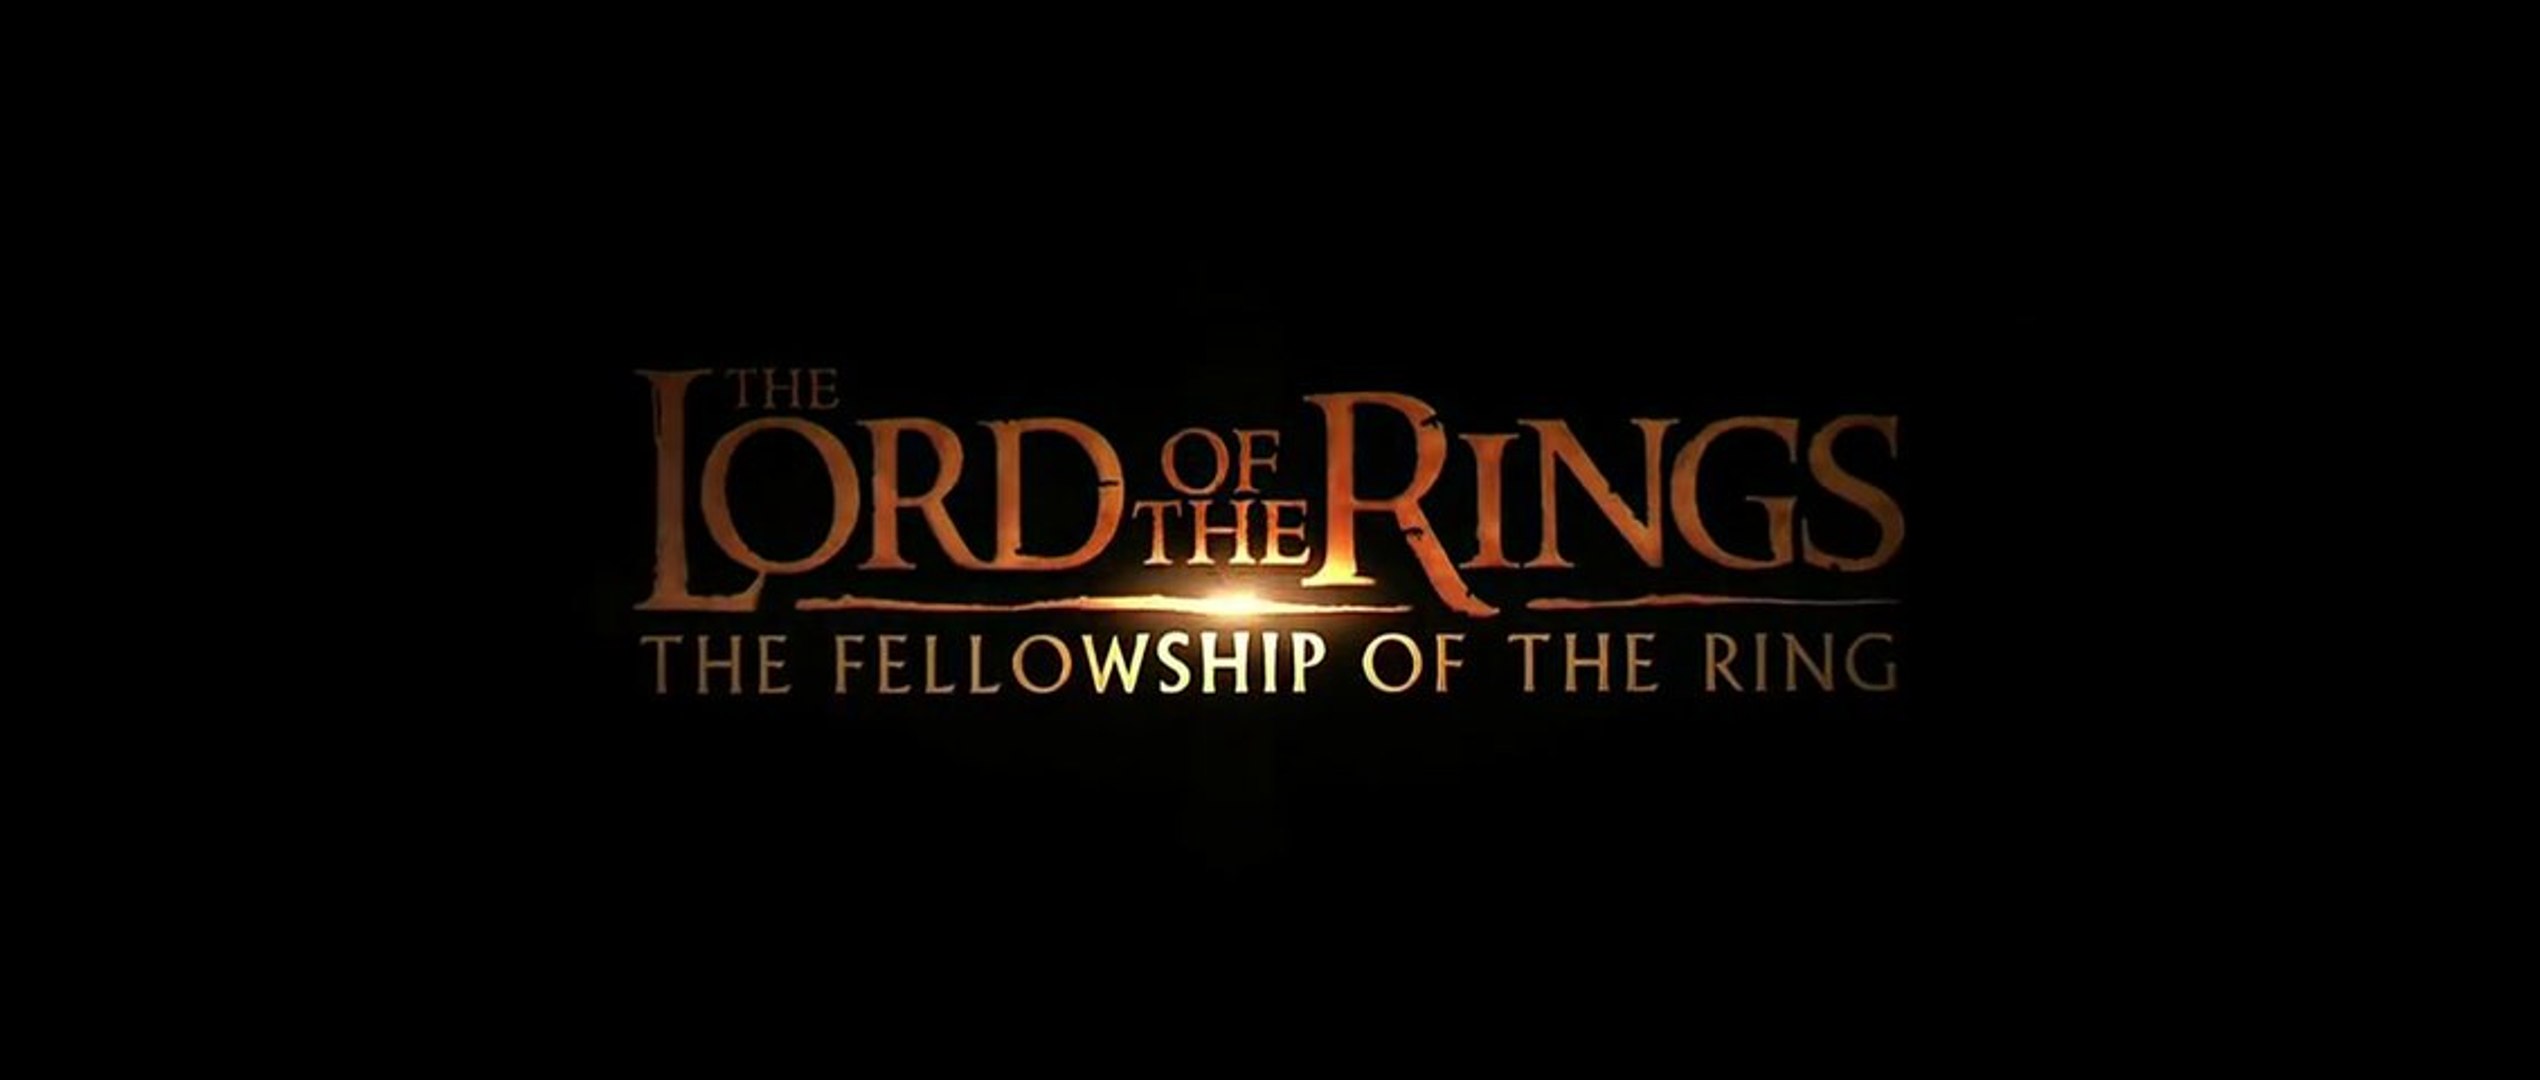 The Lord of the Rings: The Fellowship of the Ring - Official Trailer